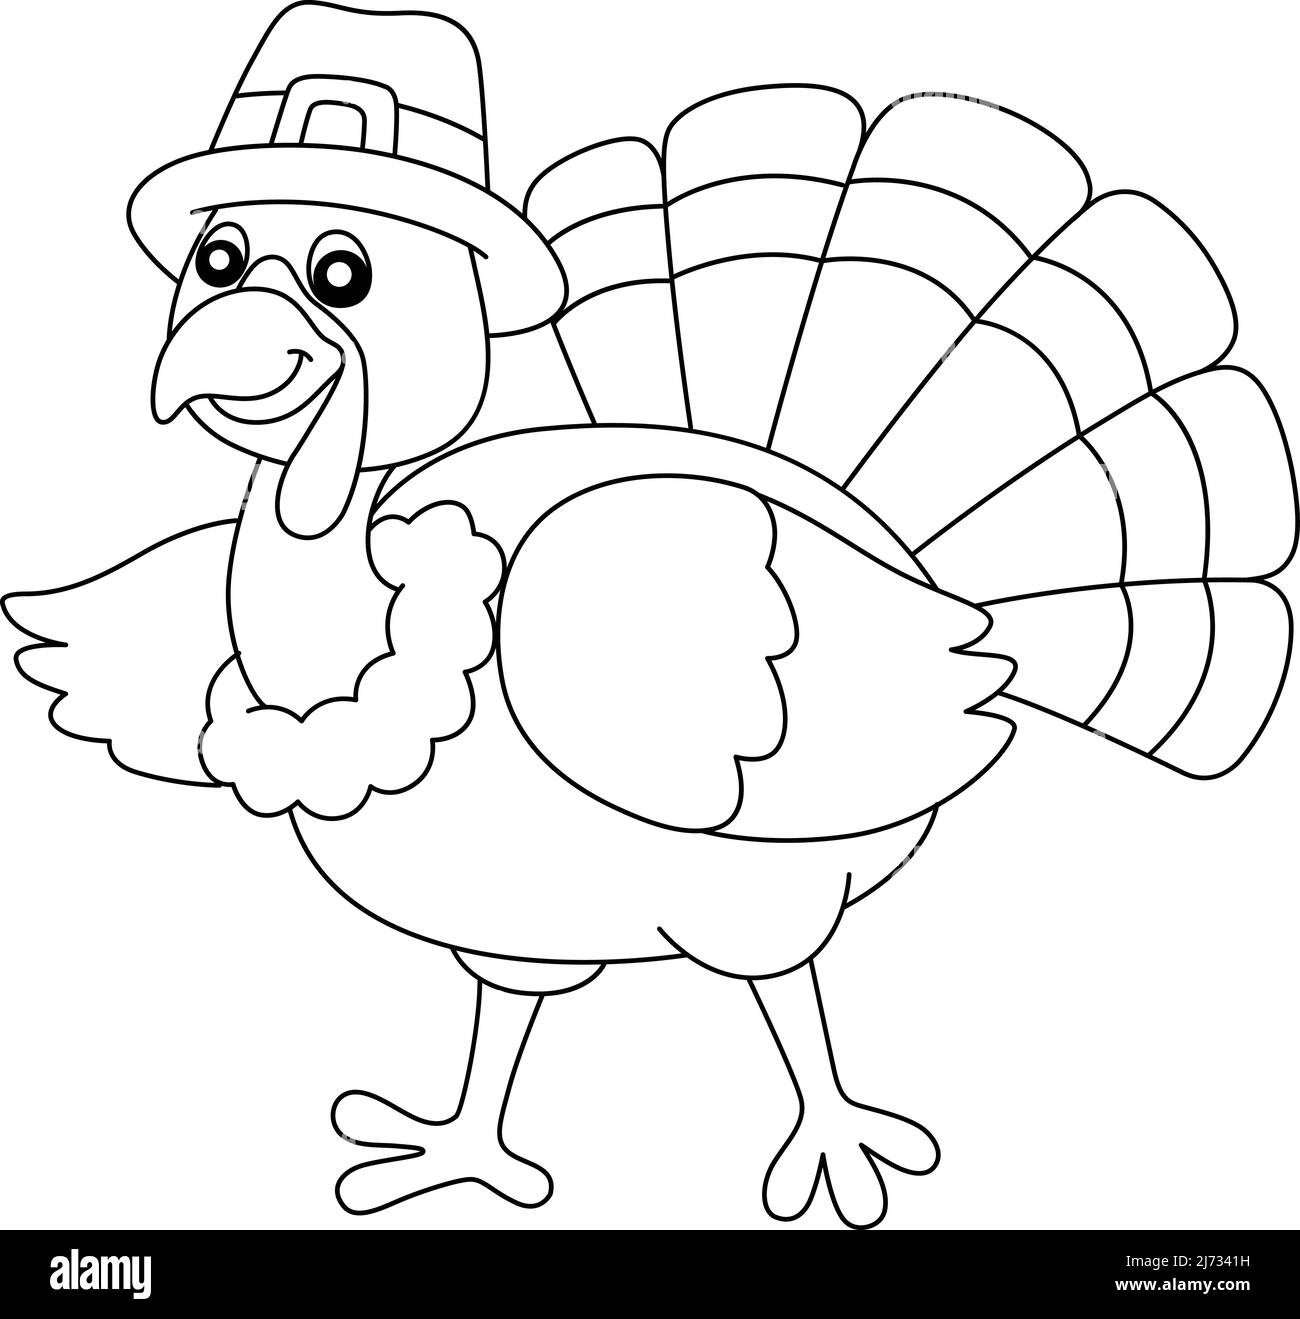 Turkey drawing hand black and white stock photos images